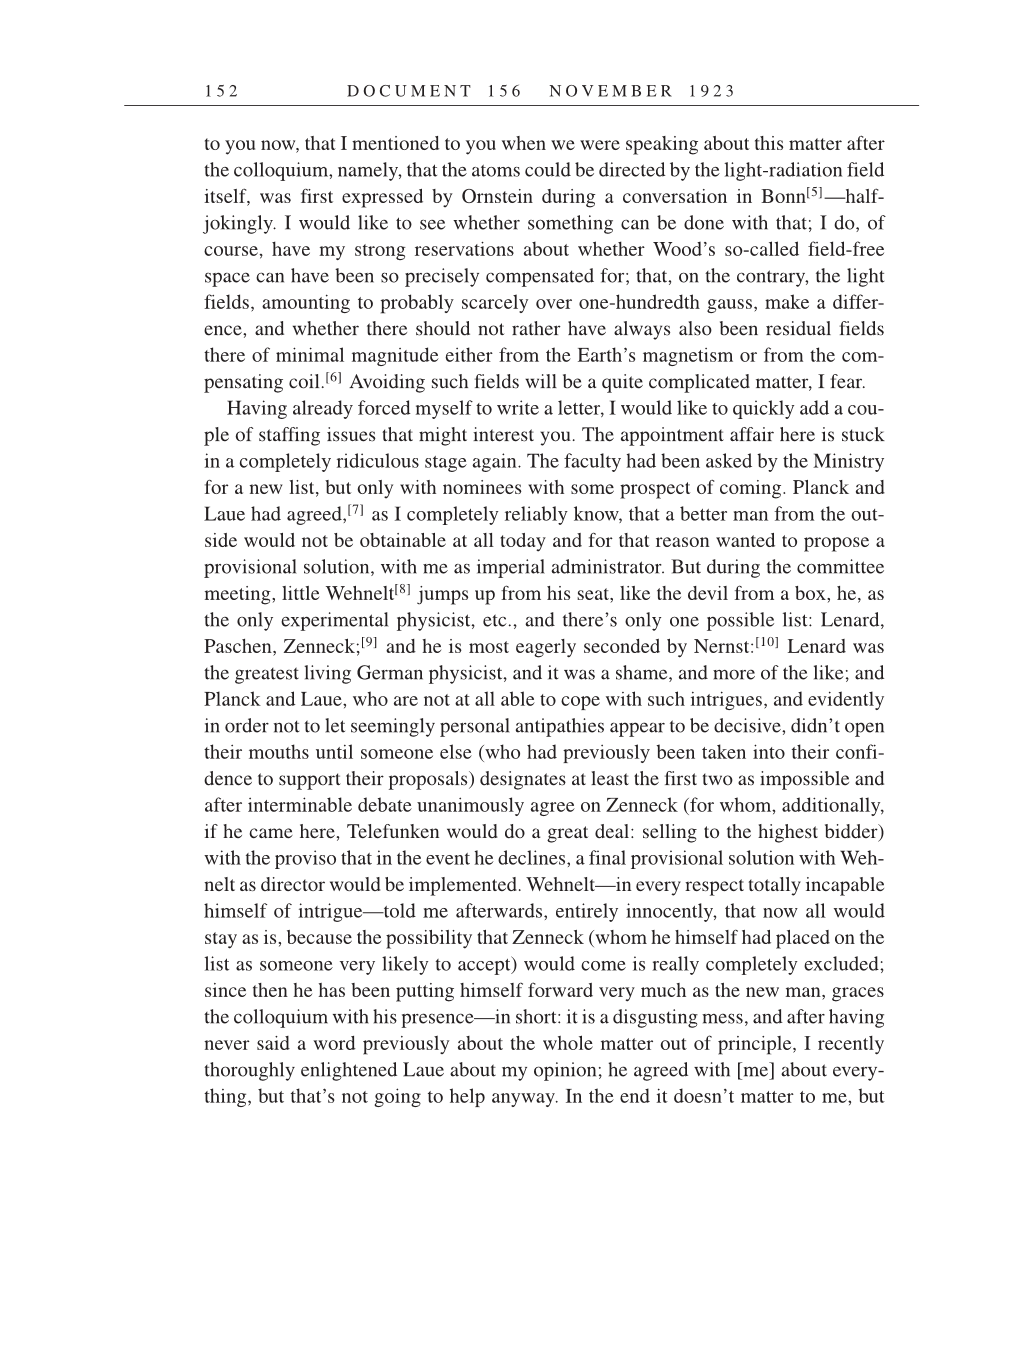 Volume 14: The Berlin Years: Writings & Correspondence, April 1923-May 1925 (English Translation Supplement) page 152